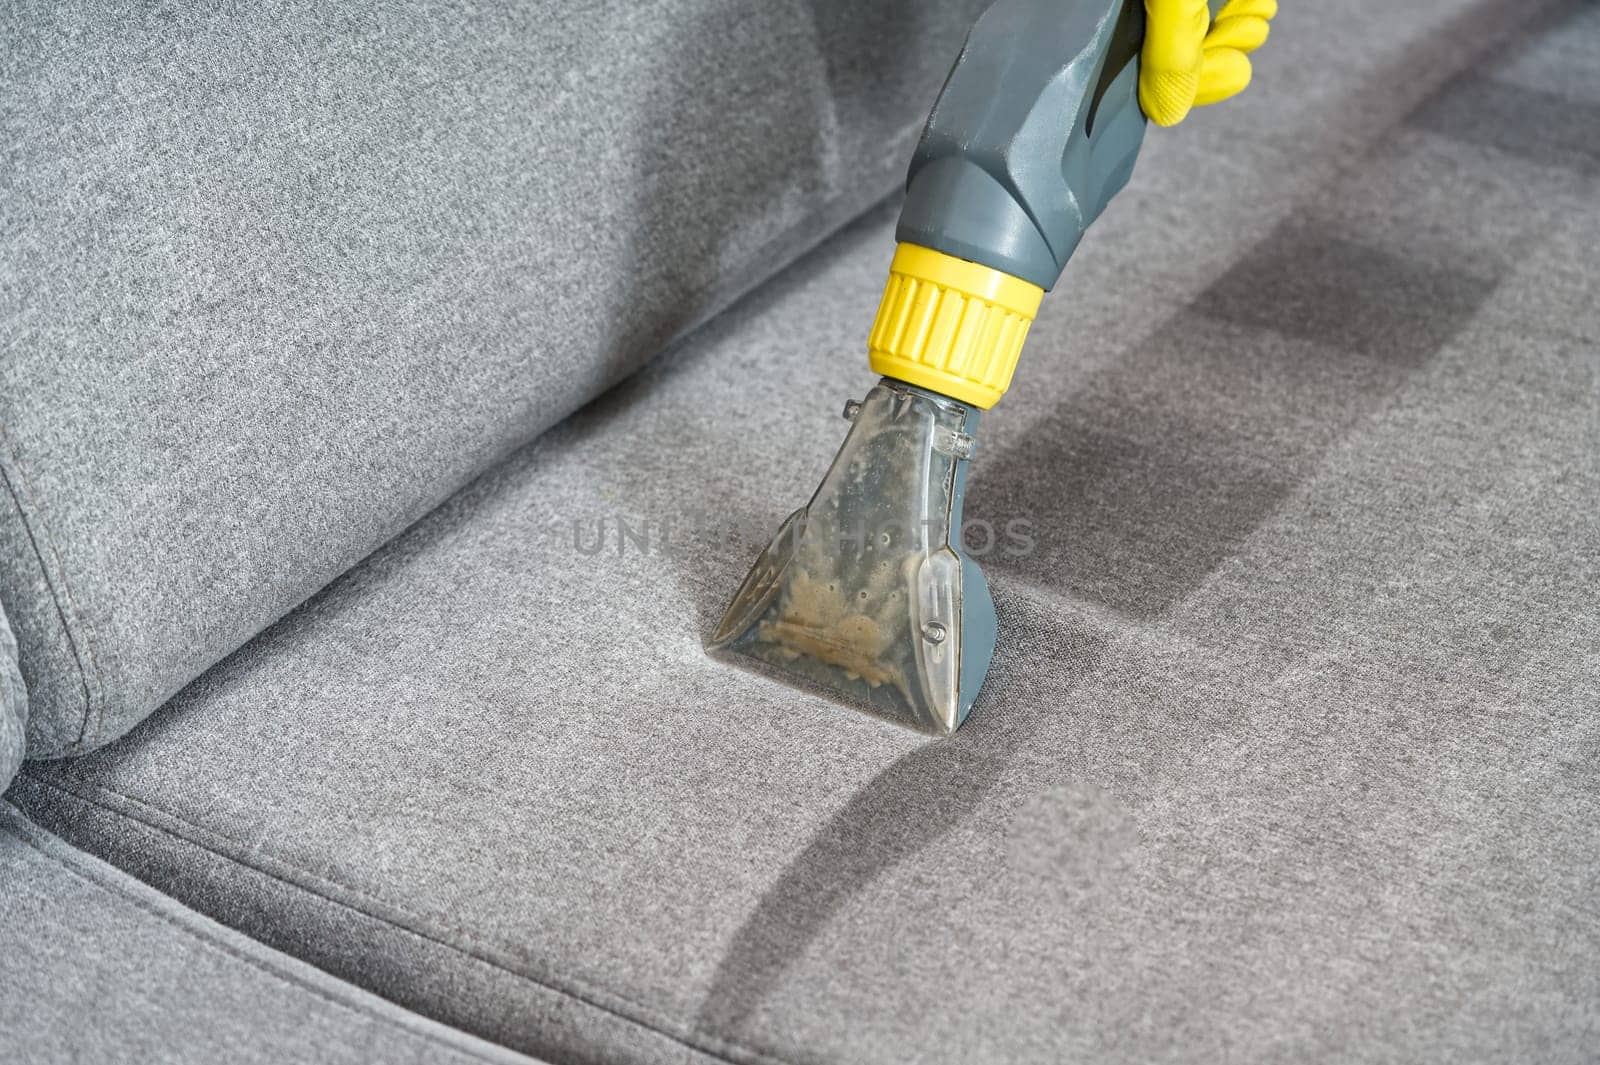 Sofa chemical cleaning with professionally extraction method. Wet textile sofa cleaning by PhotoTime